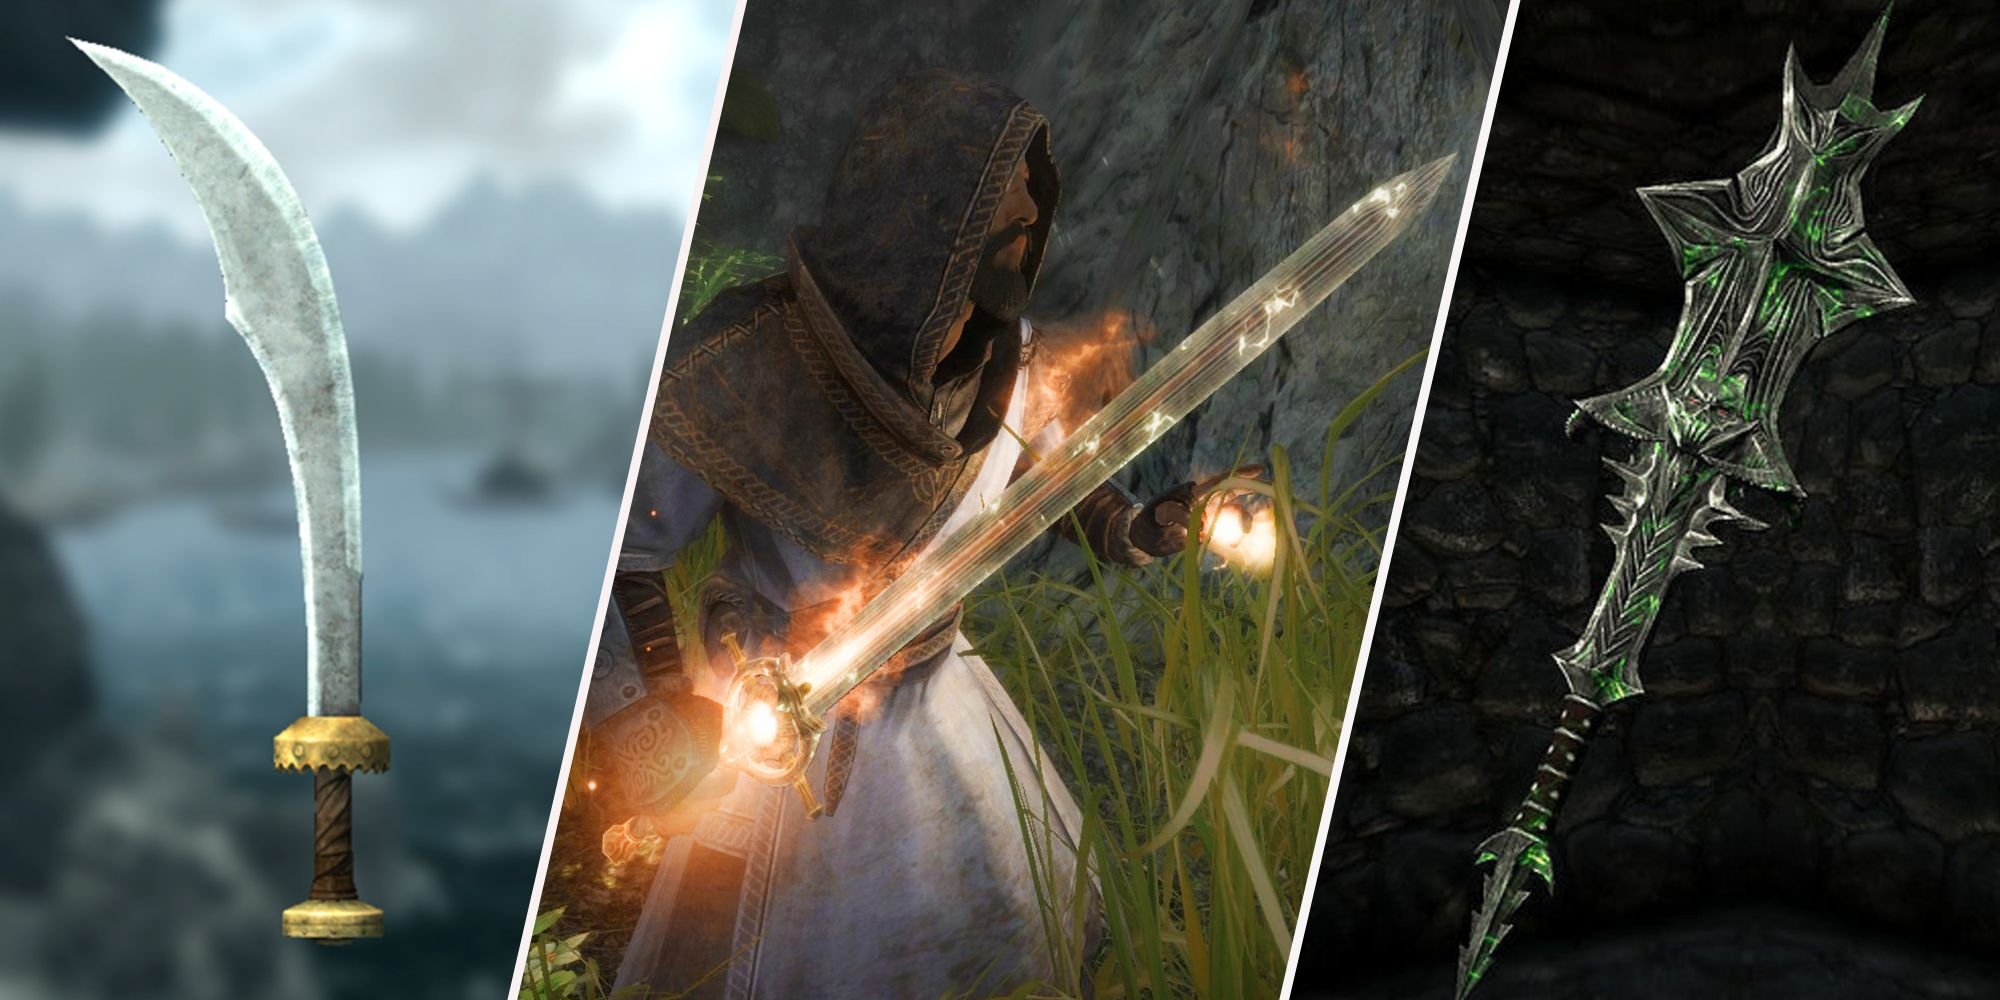 The Strongest Weapons In Skyrim (And Where To Find Them)